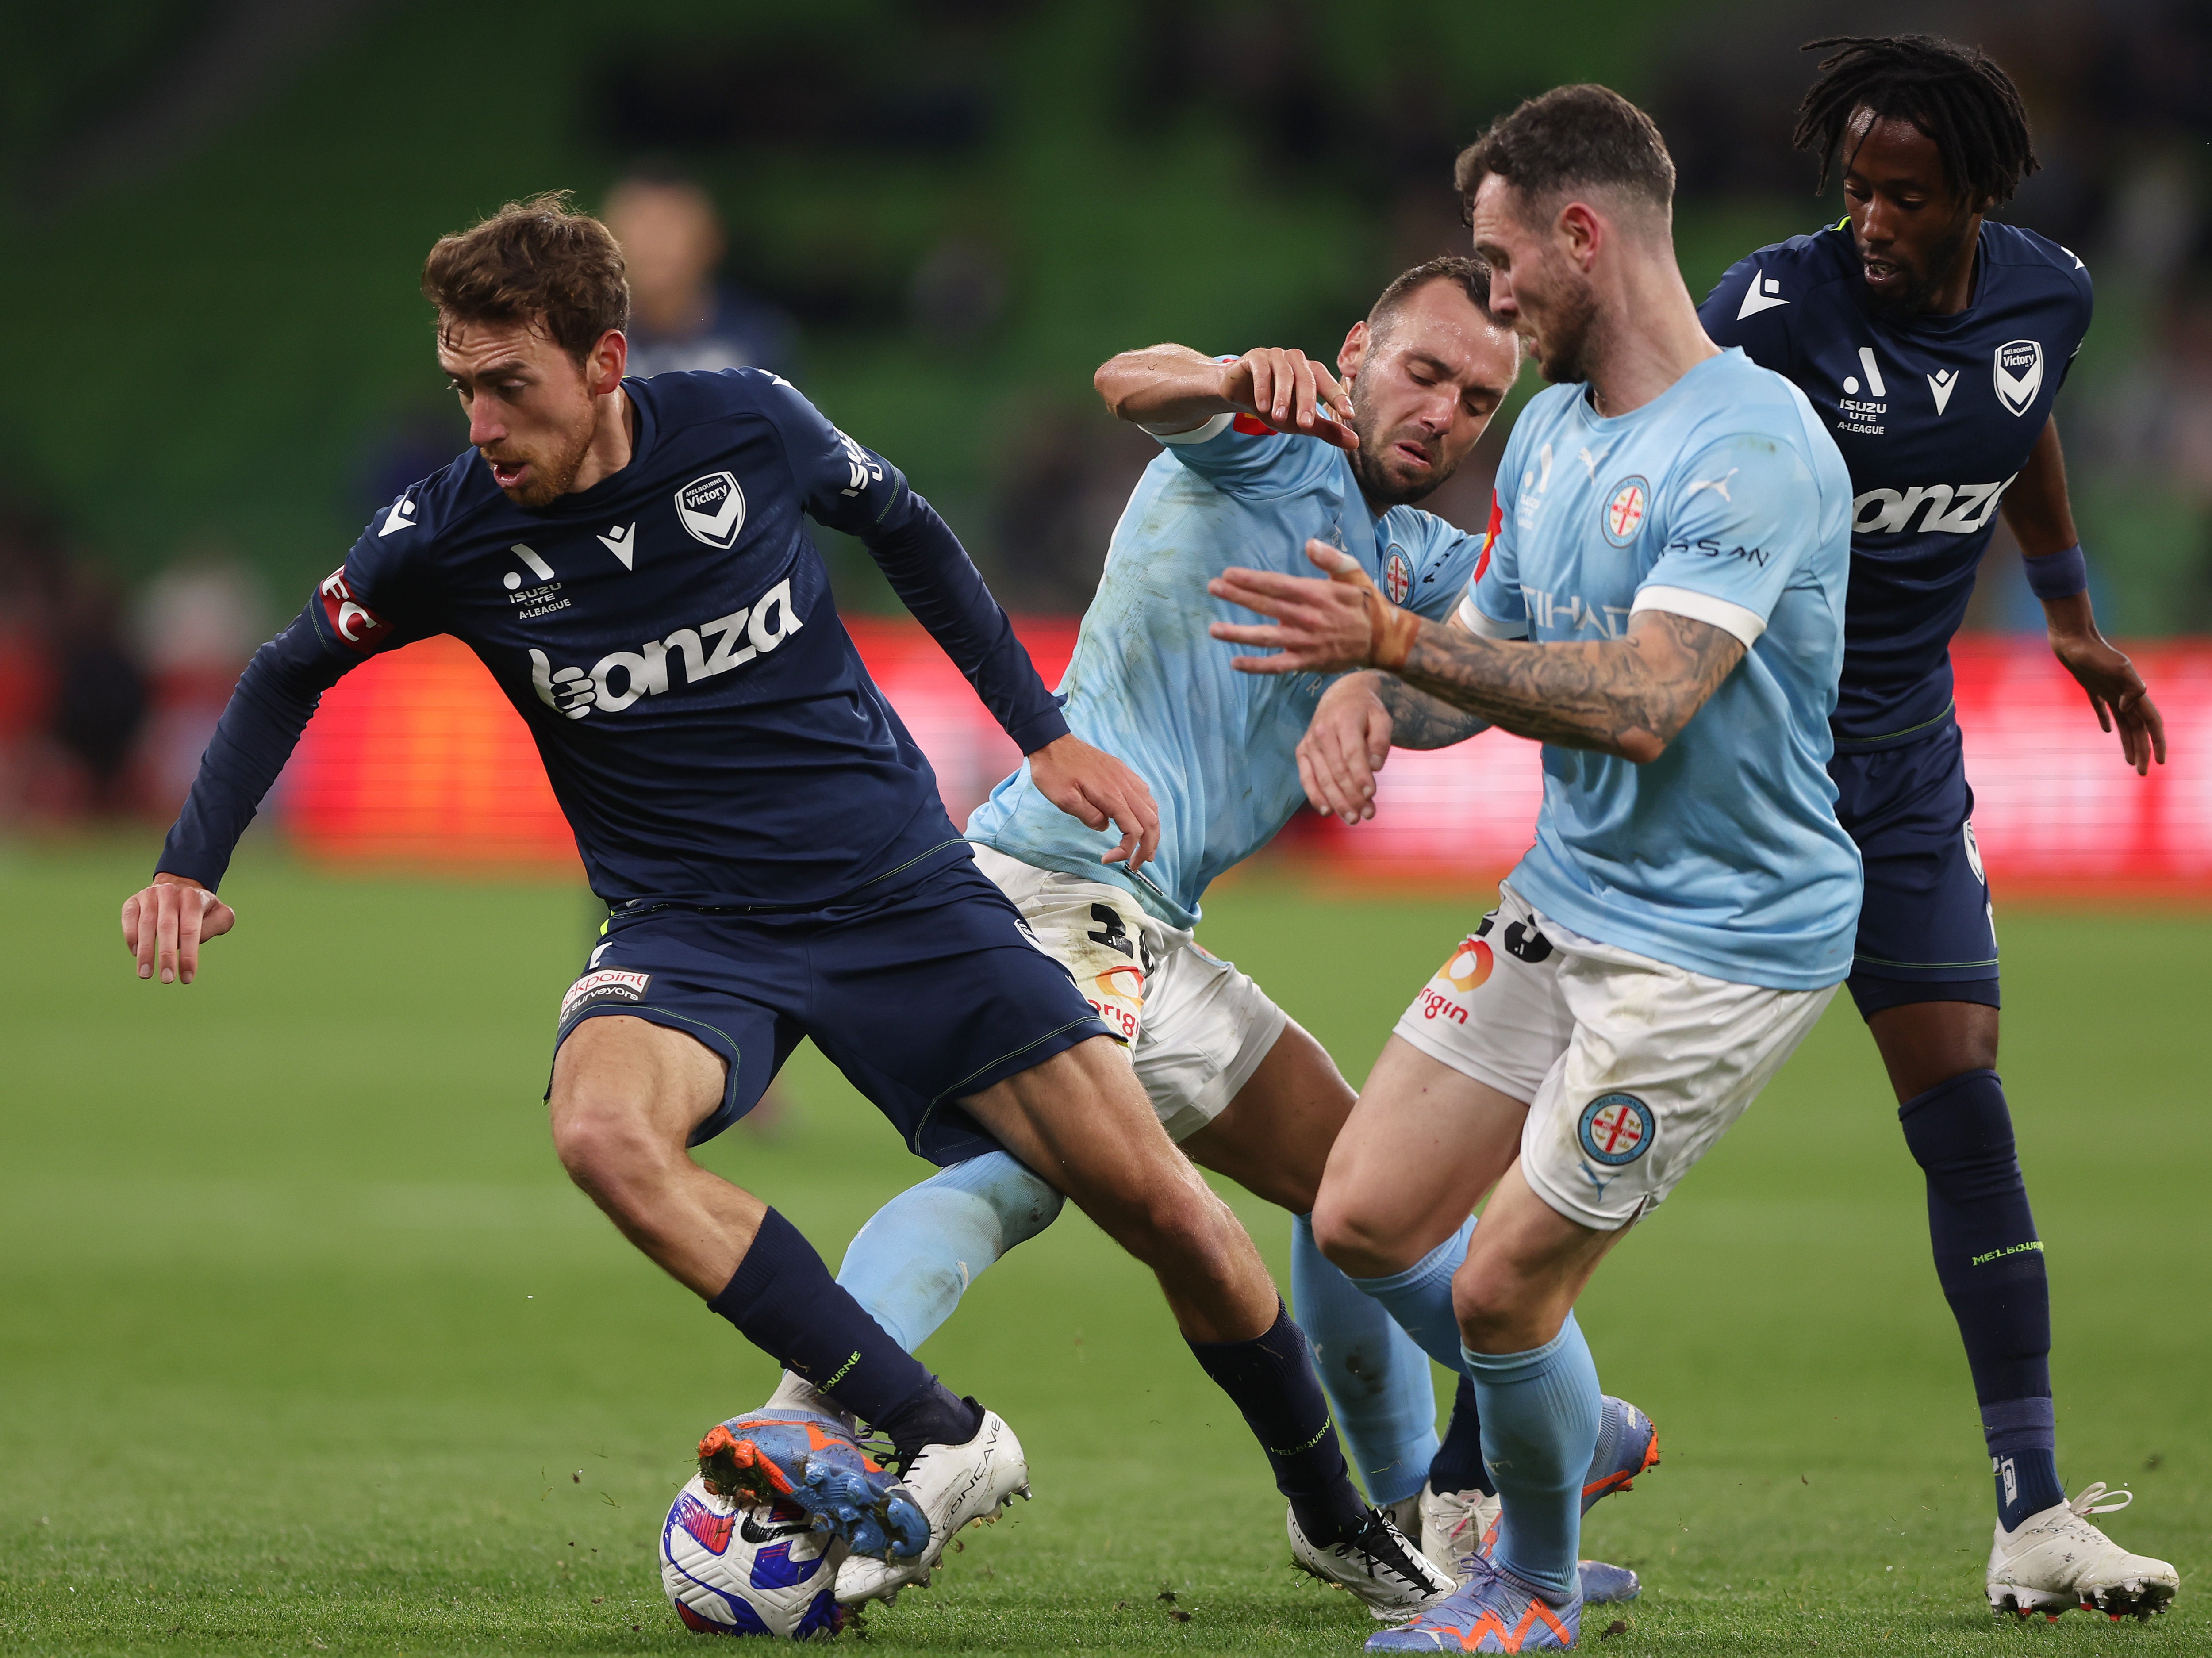 Melbourne City beat Melbourne Victory 2-1 after the match resumed